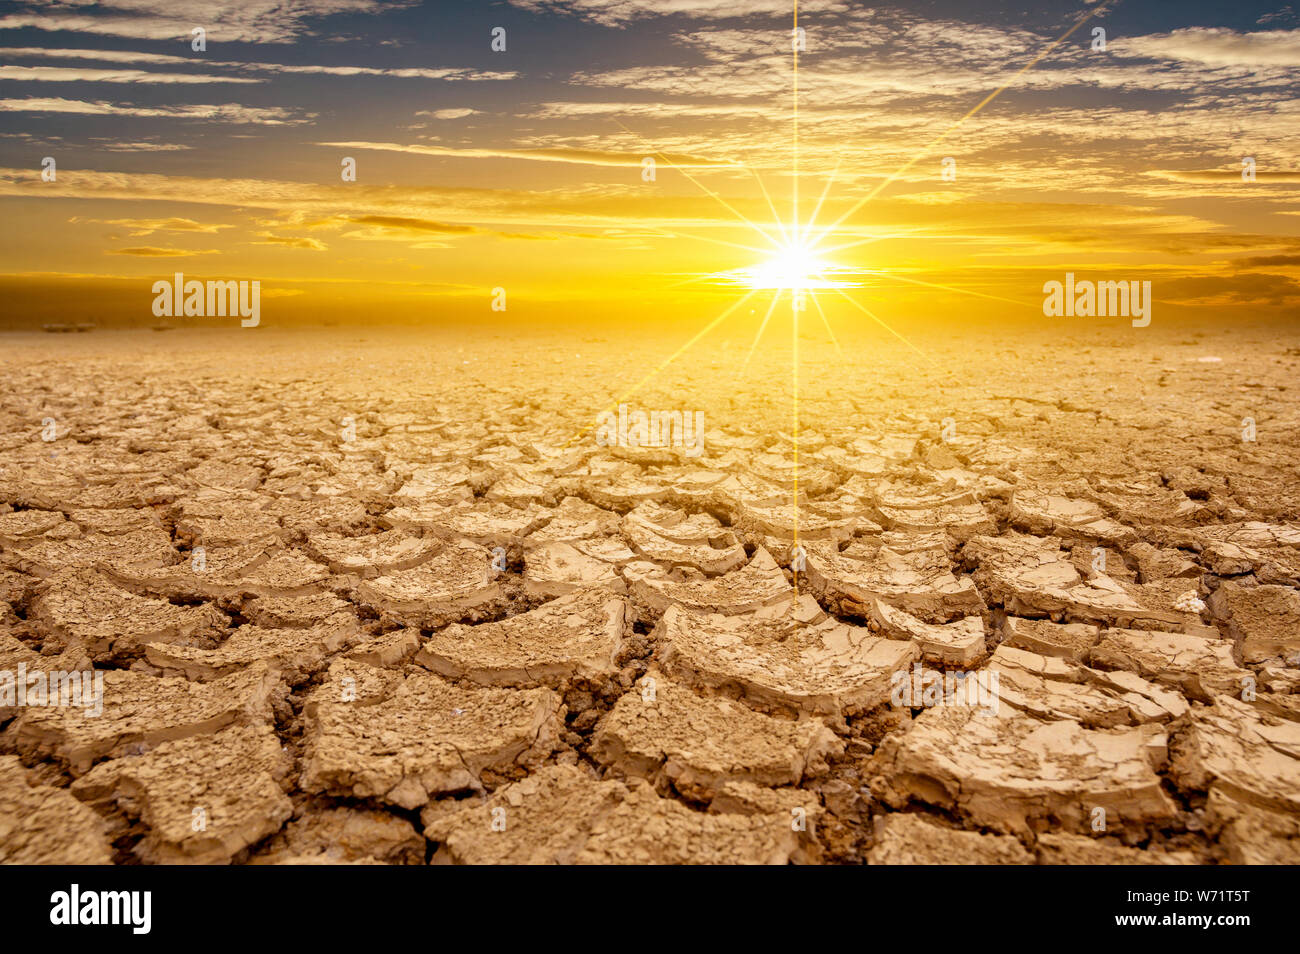 arid Clay soil Sun desert global worming concept cracked scorched earth soil drought desert landscape dramatic sunset Stock Photo